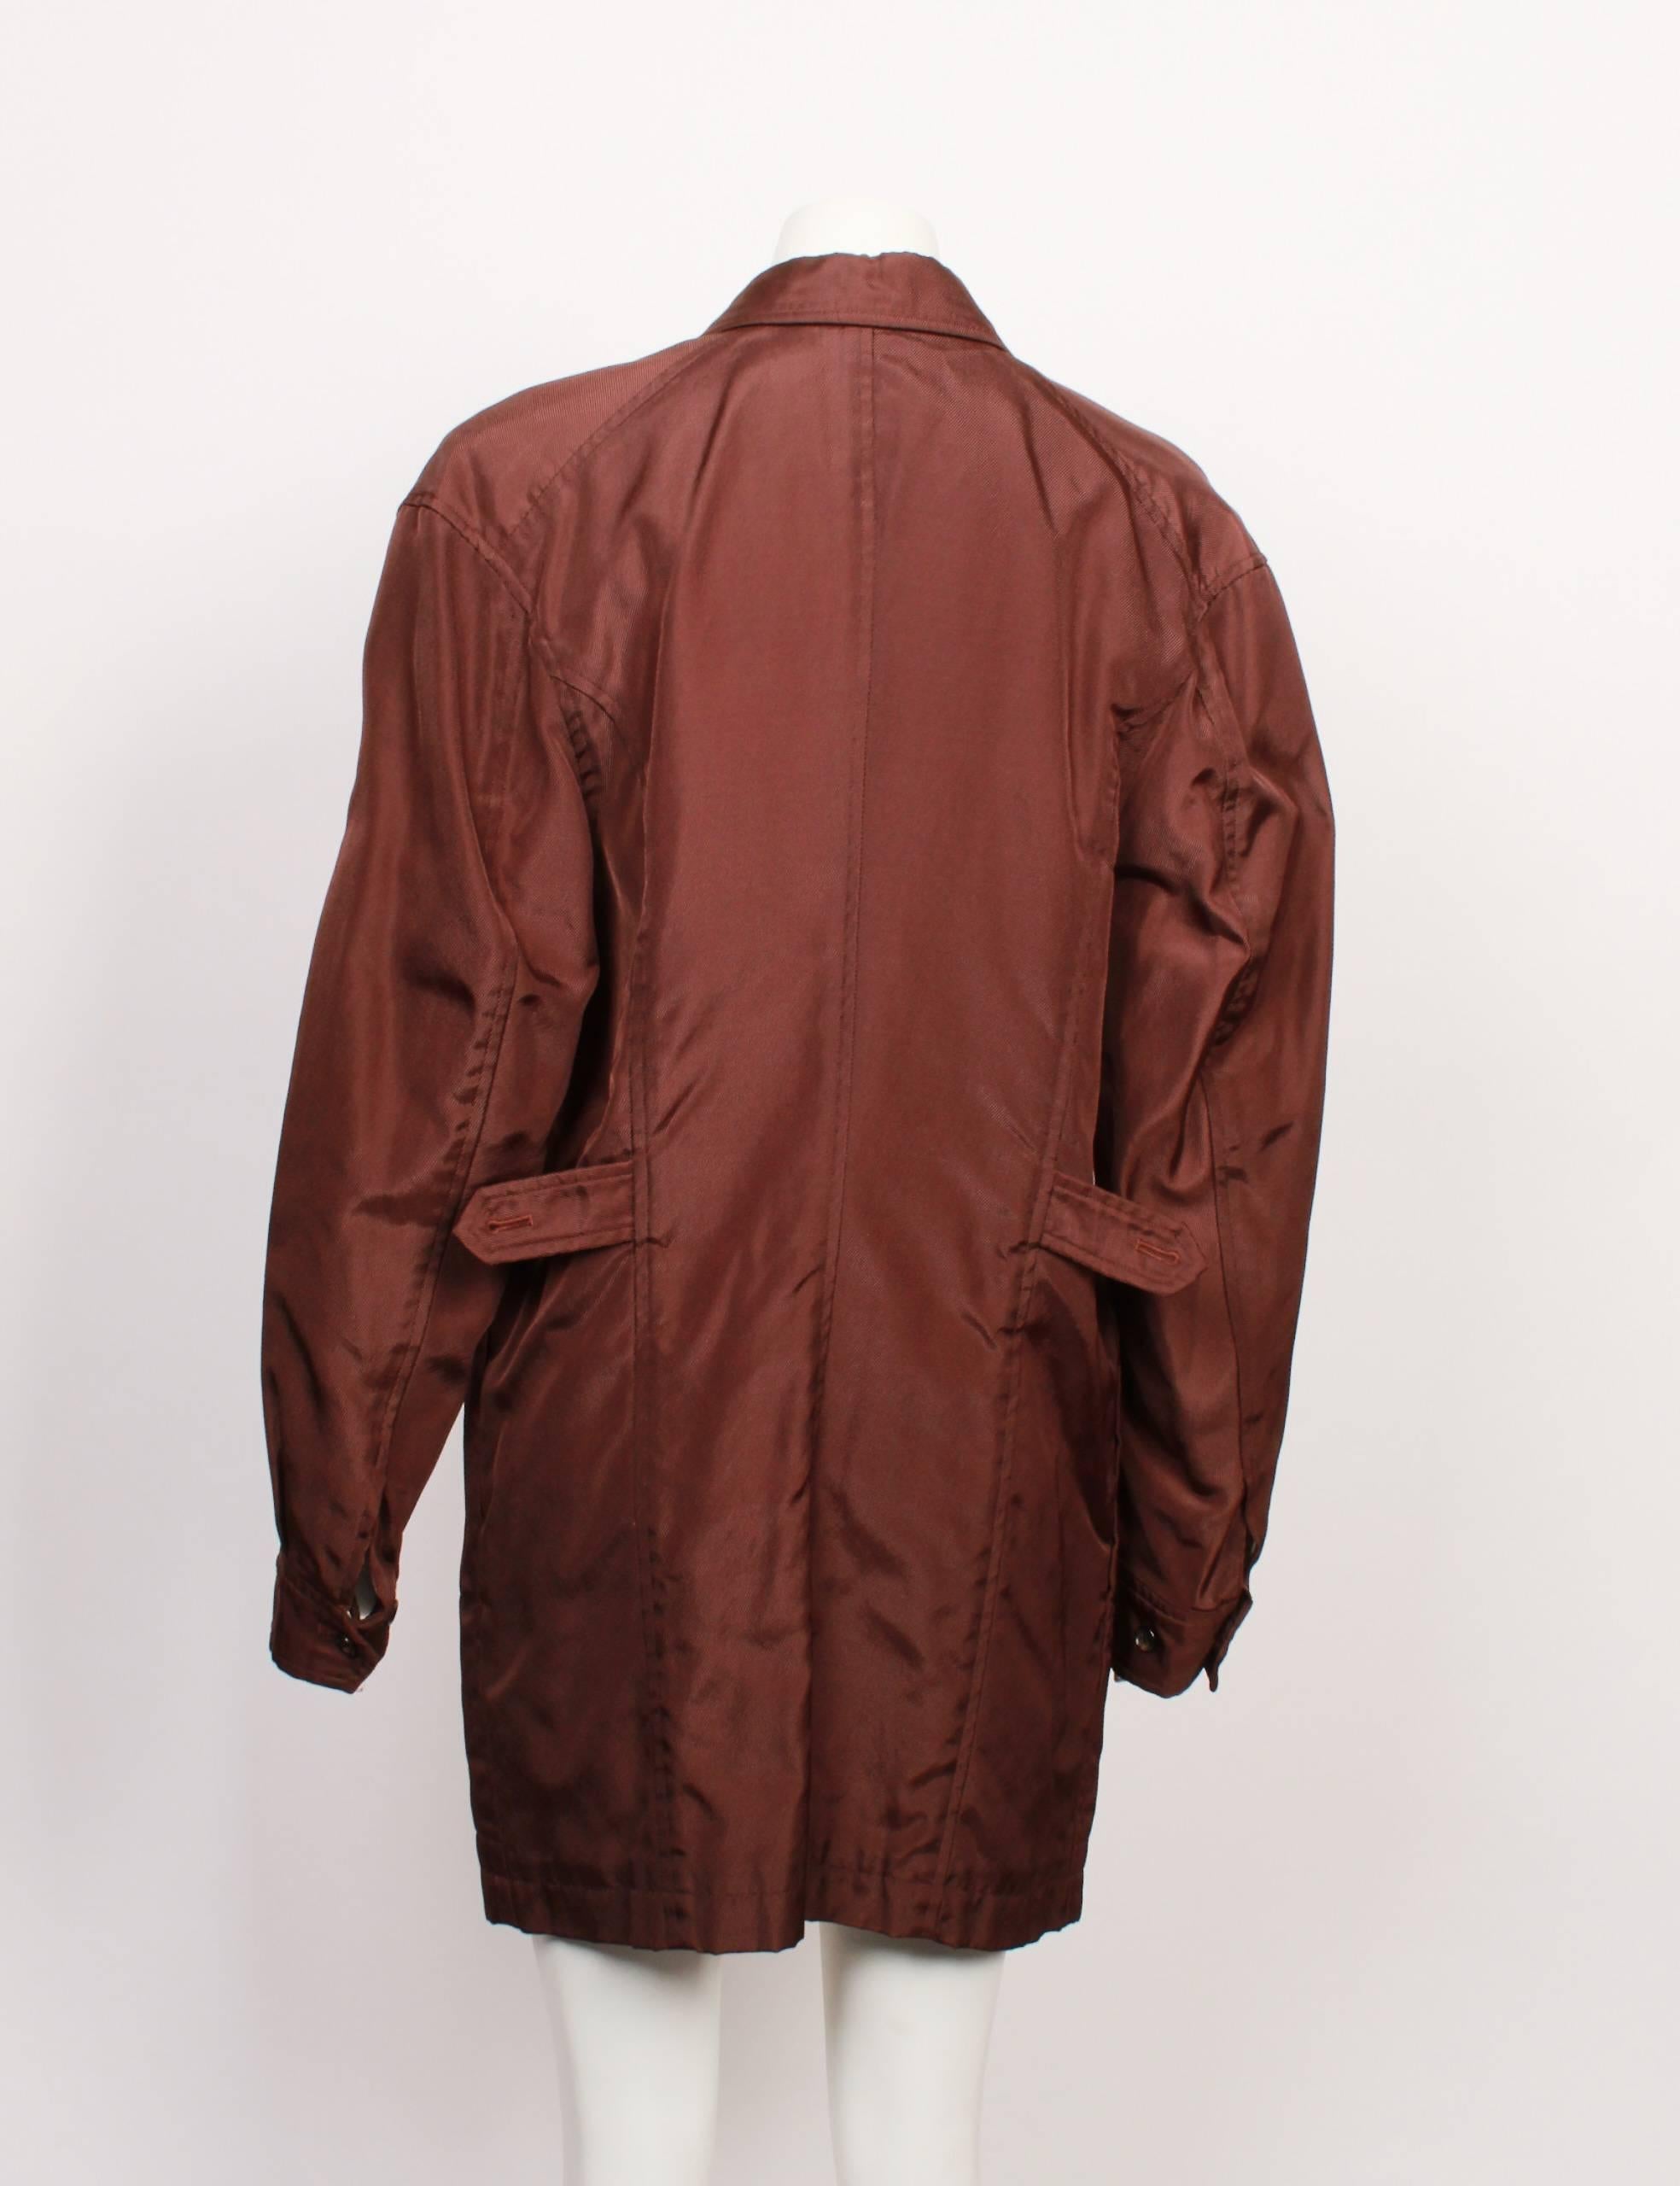 Comme Des Garcons Jacket In Good Condition For Sale In Melbourne, Victoria